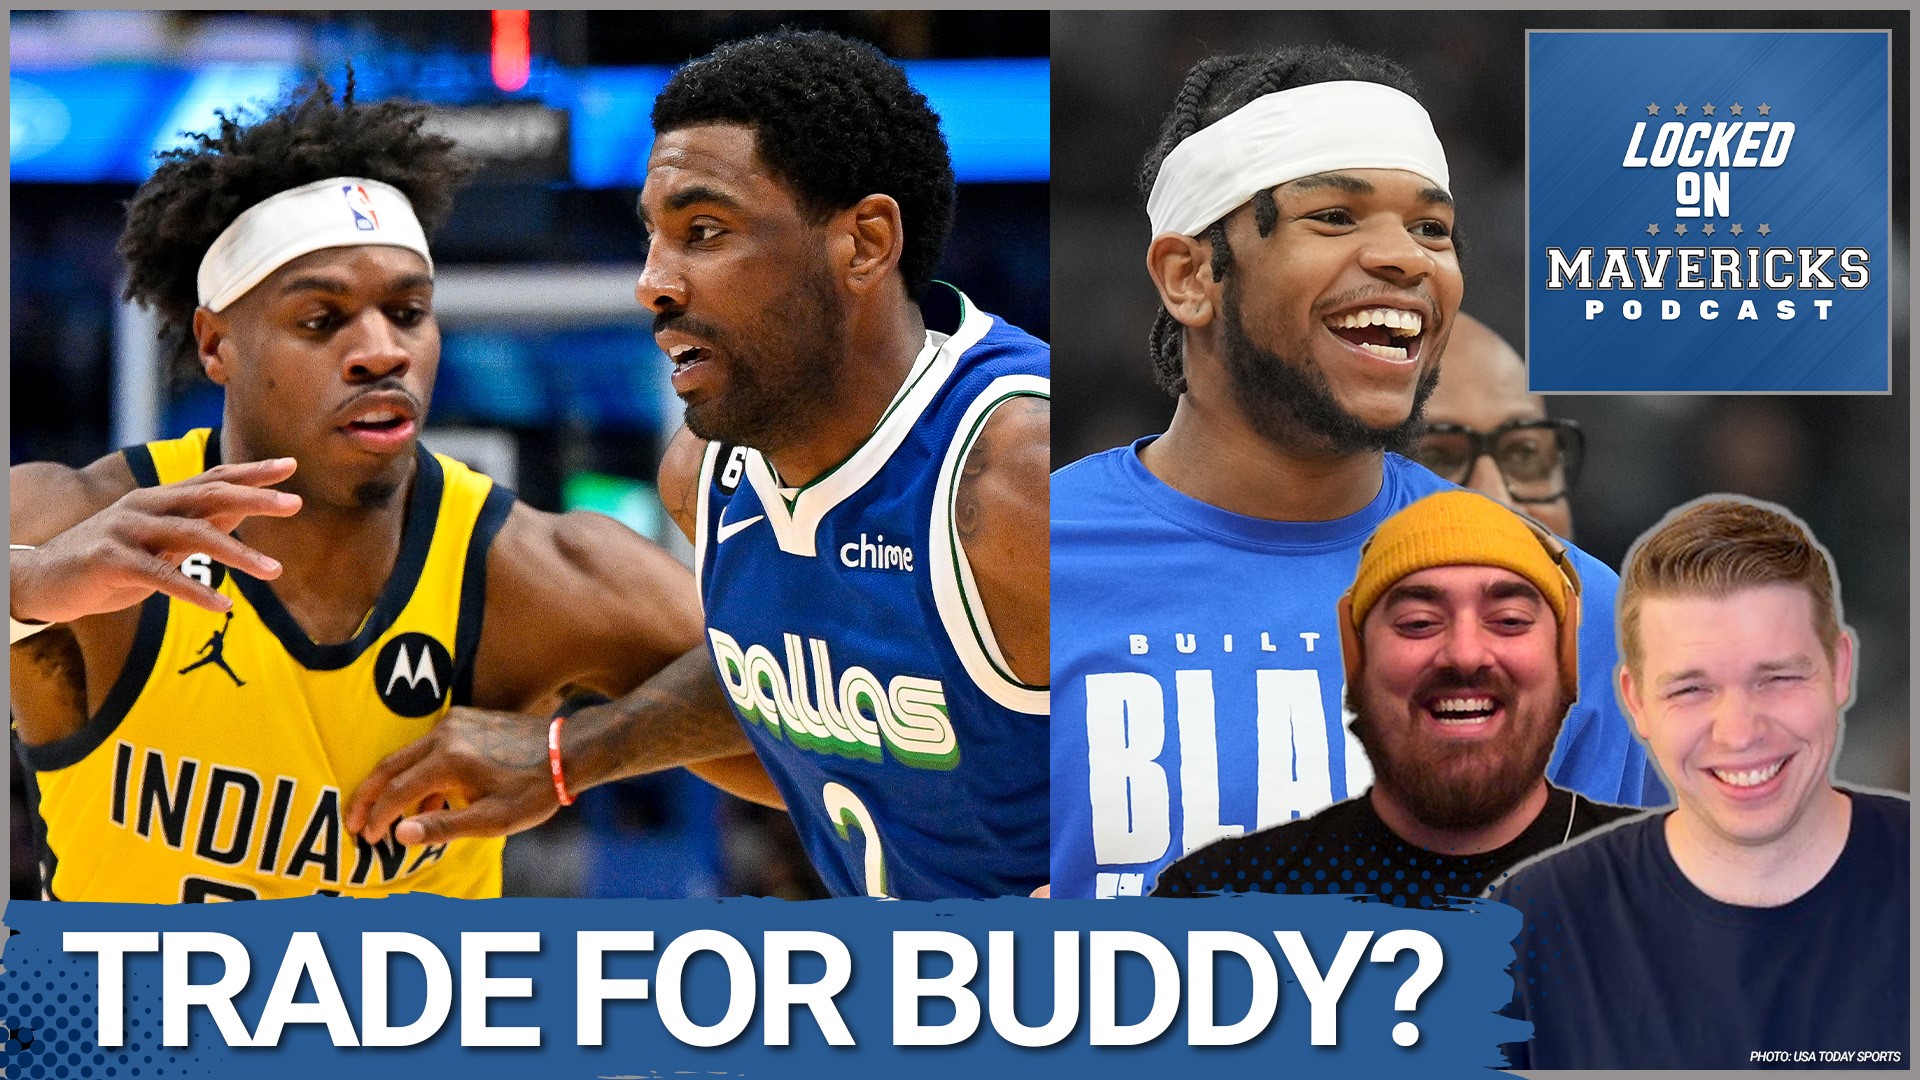 Nick Angstadt & Isaac Harris ask if the Dallas Mavericks should trade for Buddy Hield or not, then they discuss the potential highs and lows for Jaden Hardy and more